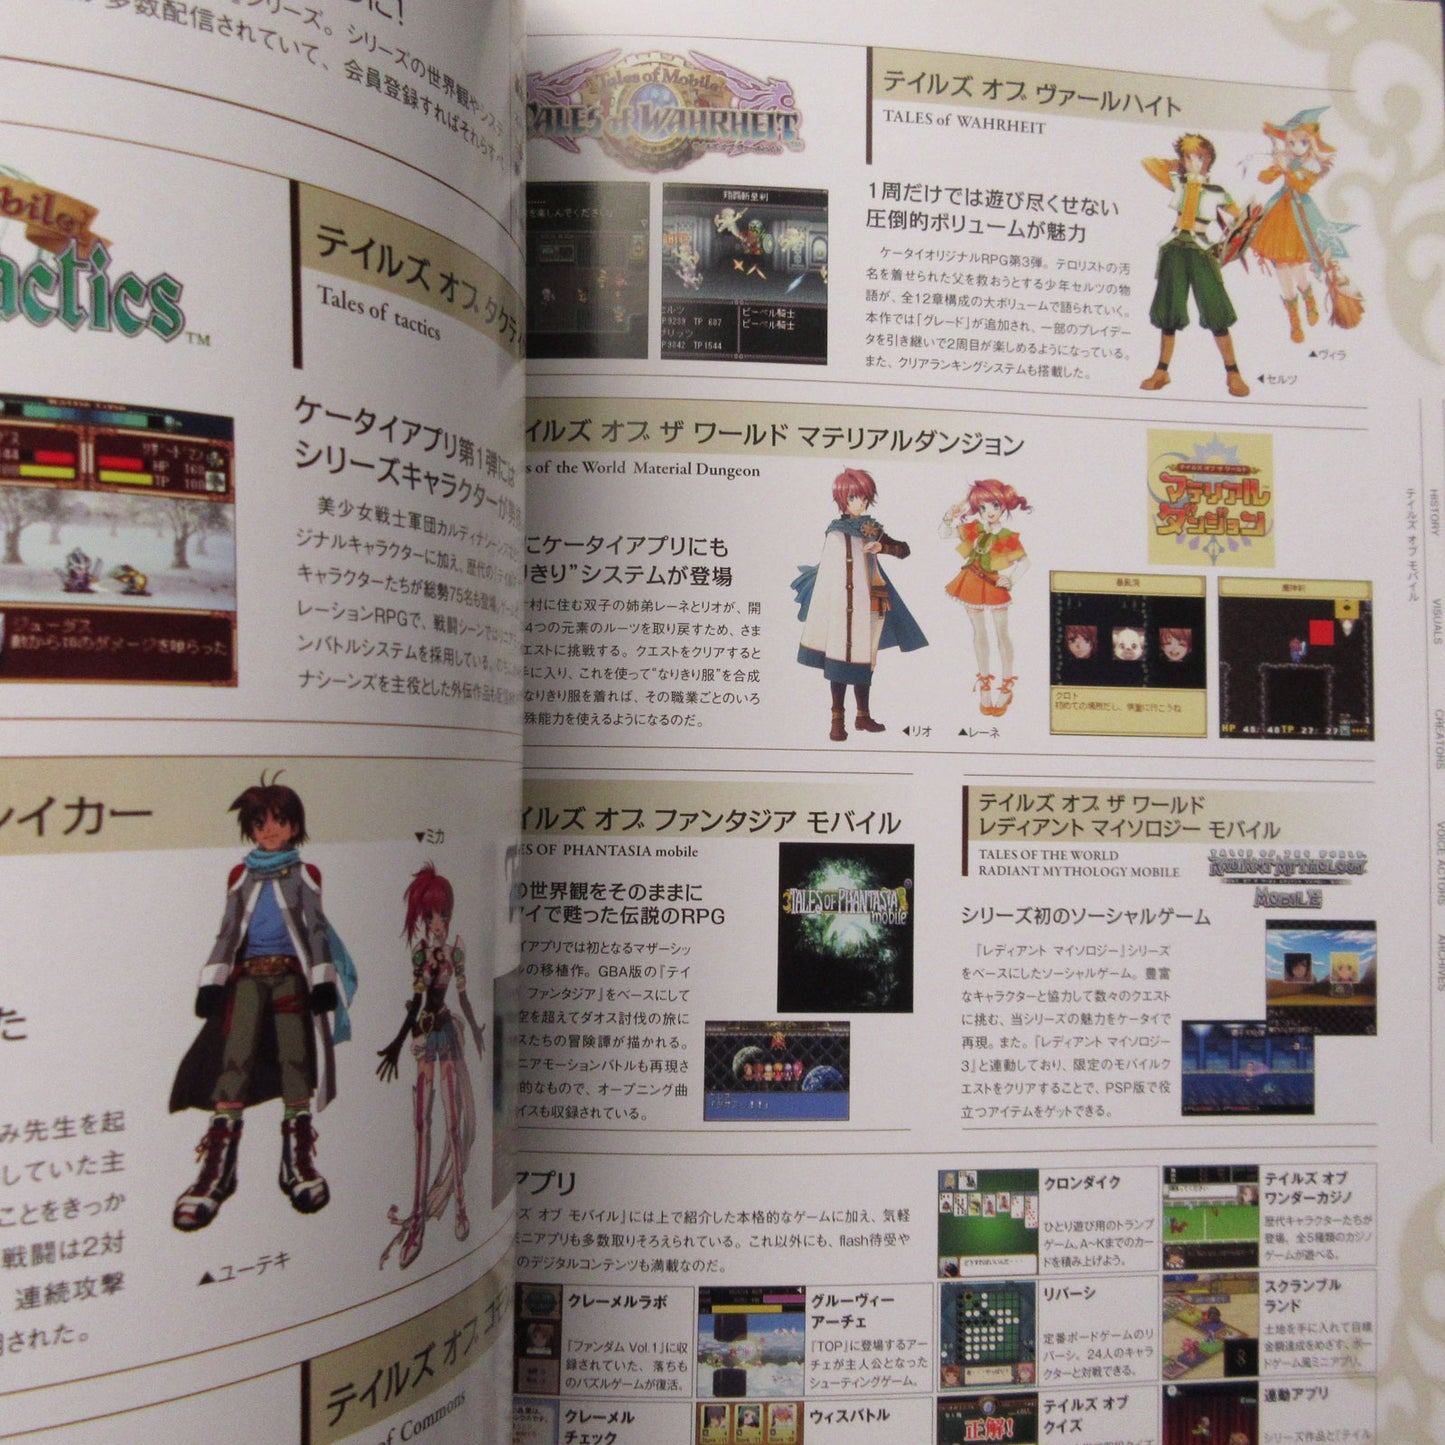 Tales of CHRONICLE from 1995-2010 Tales of 15th Anniversary